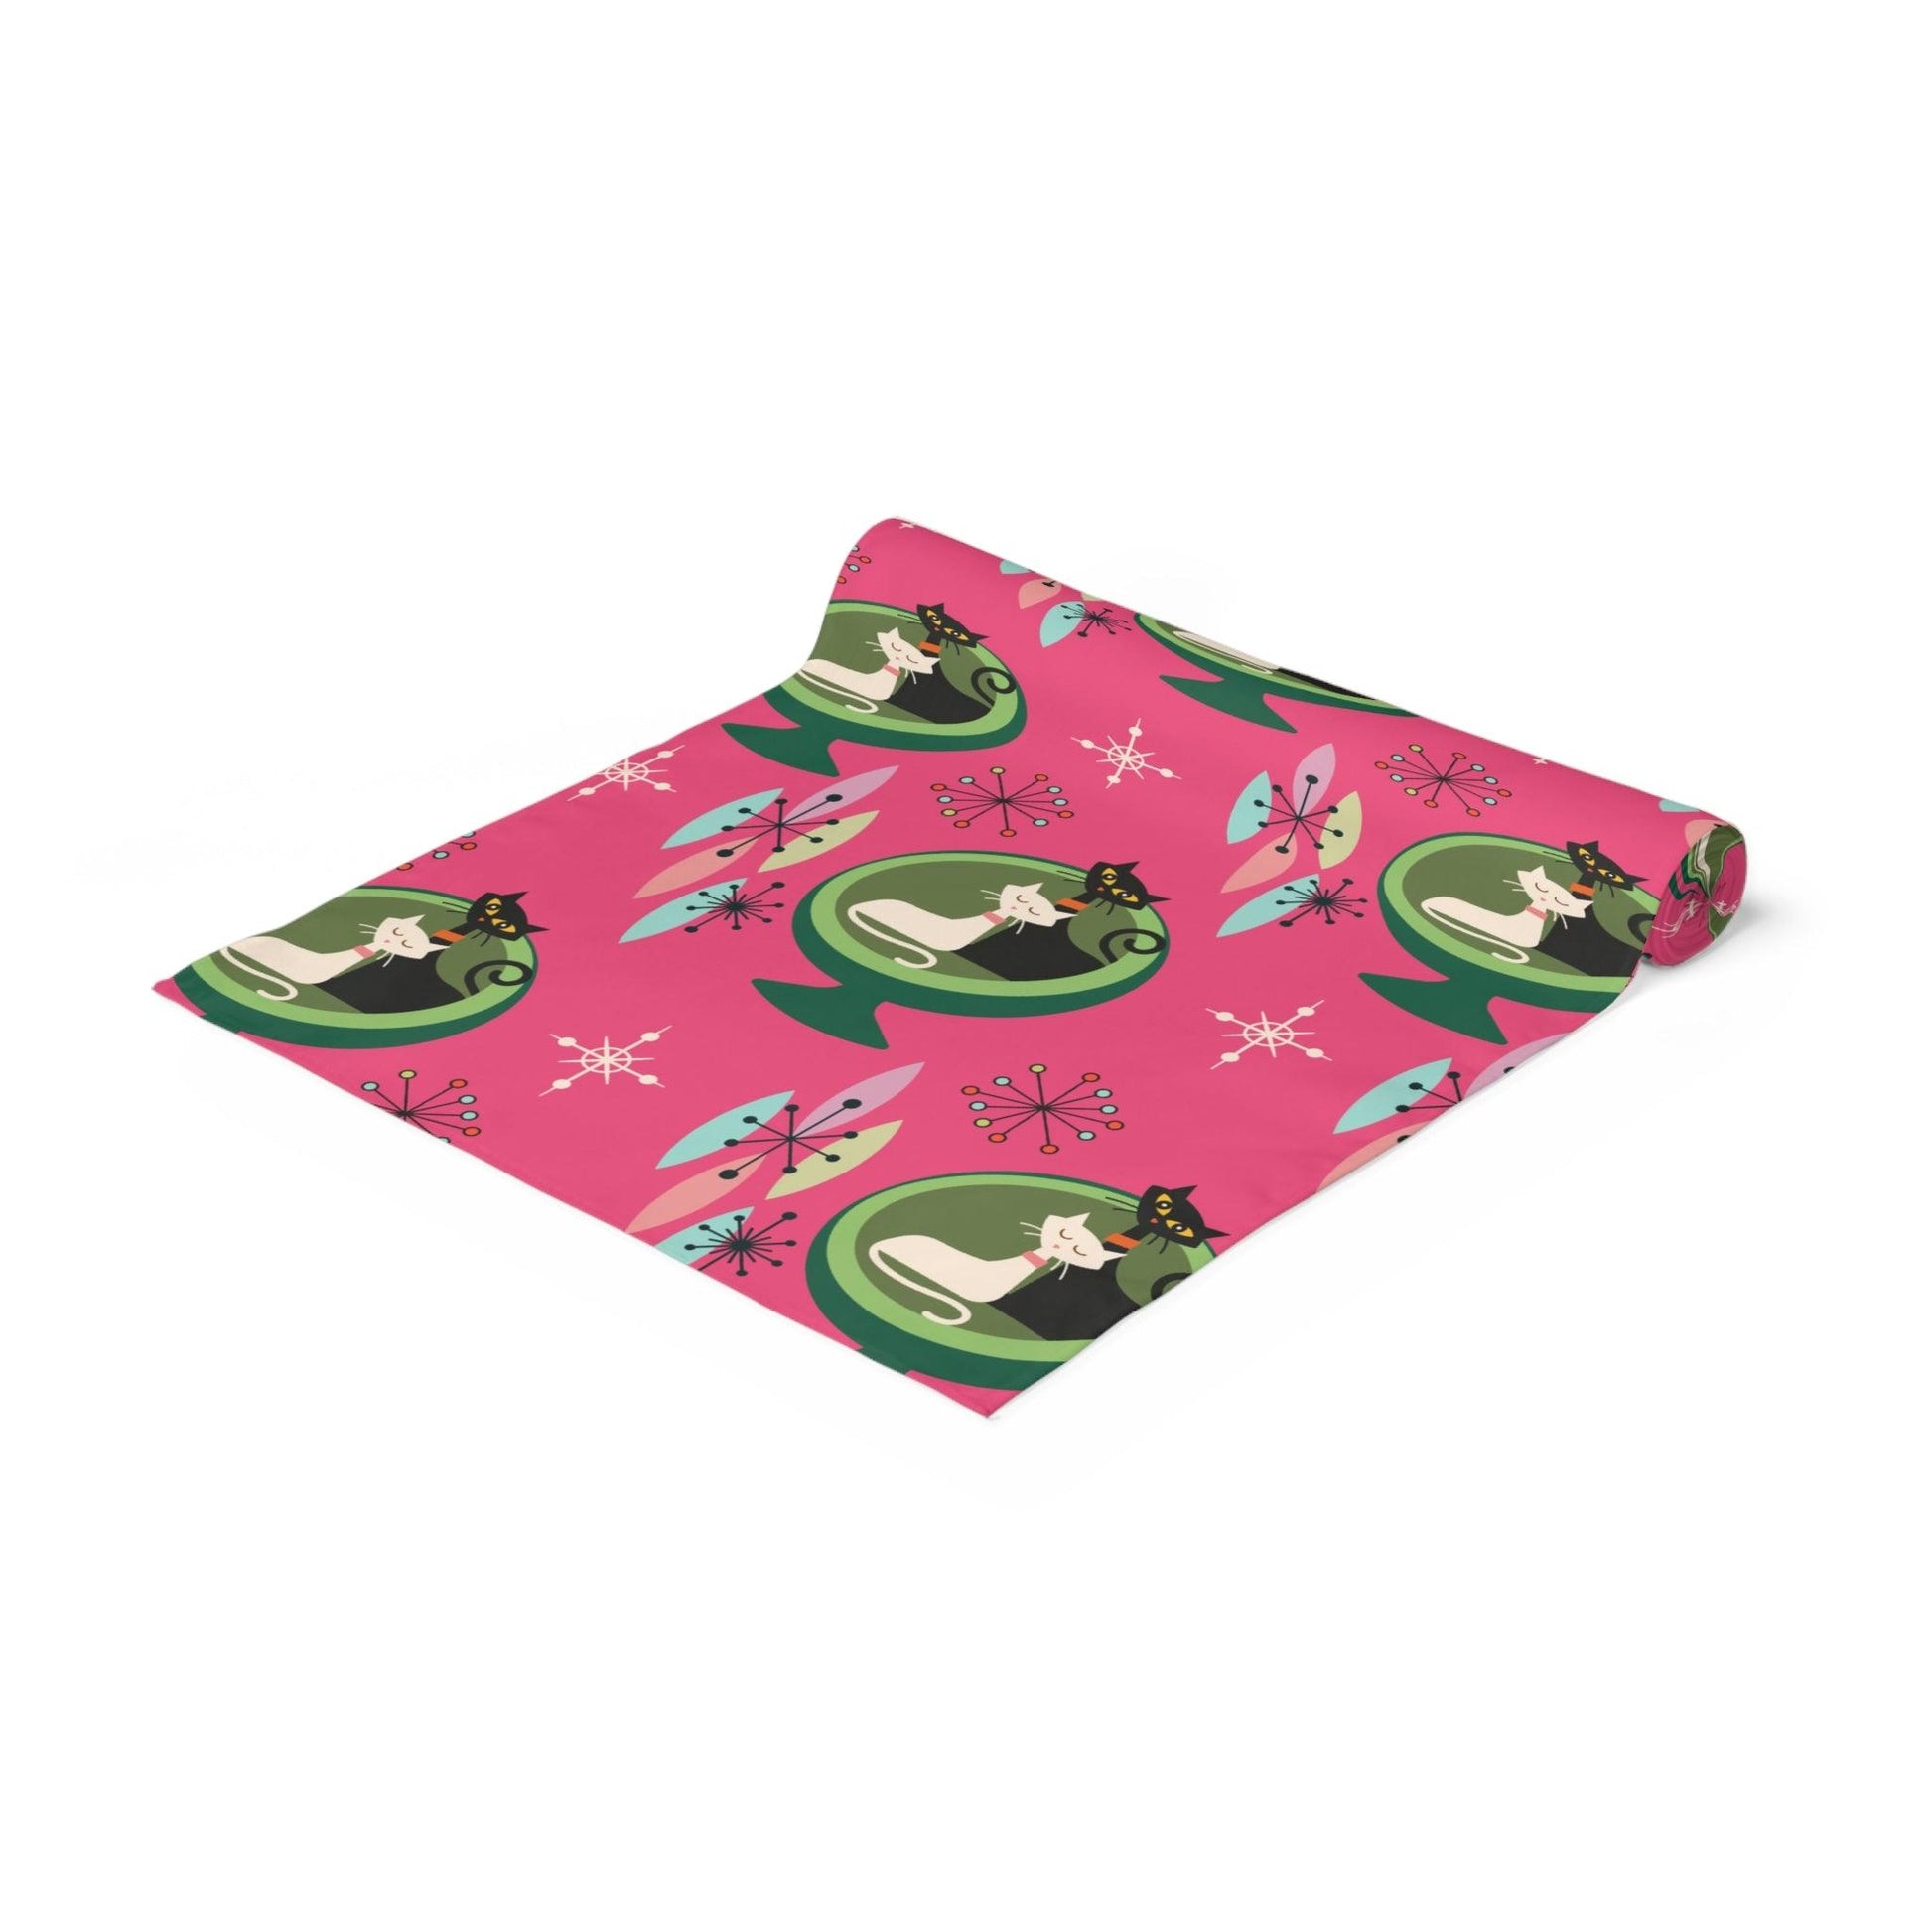 Retro Atomic Cat Couple in Ball Chair MCM Pink & Green Table Runner | lovevisionkarma.com